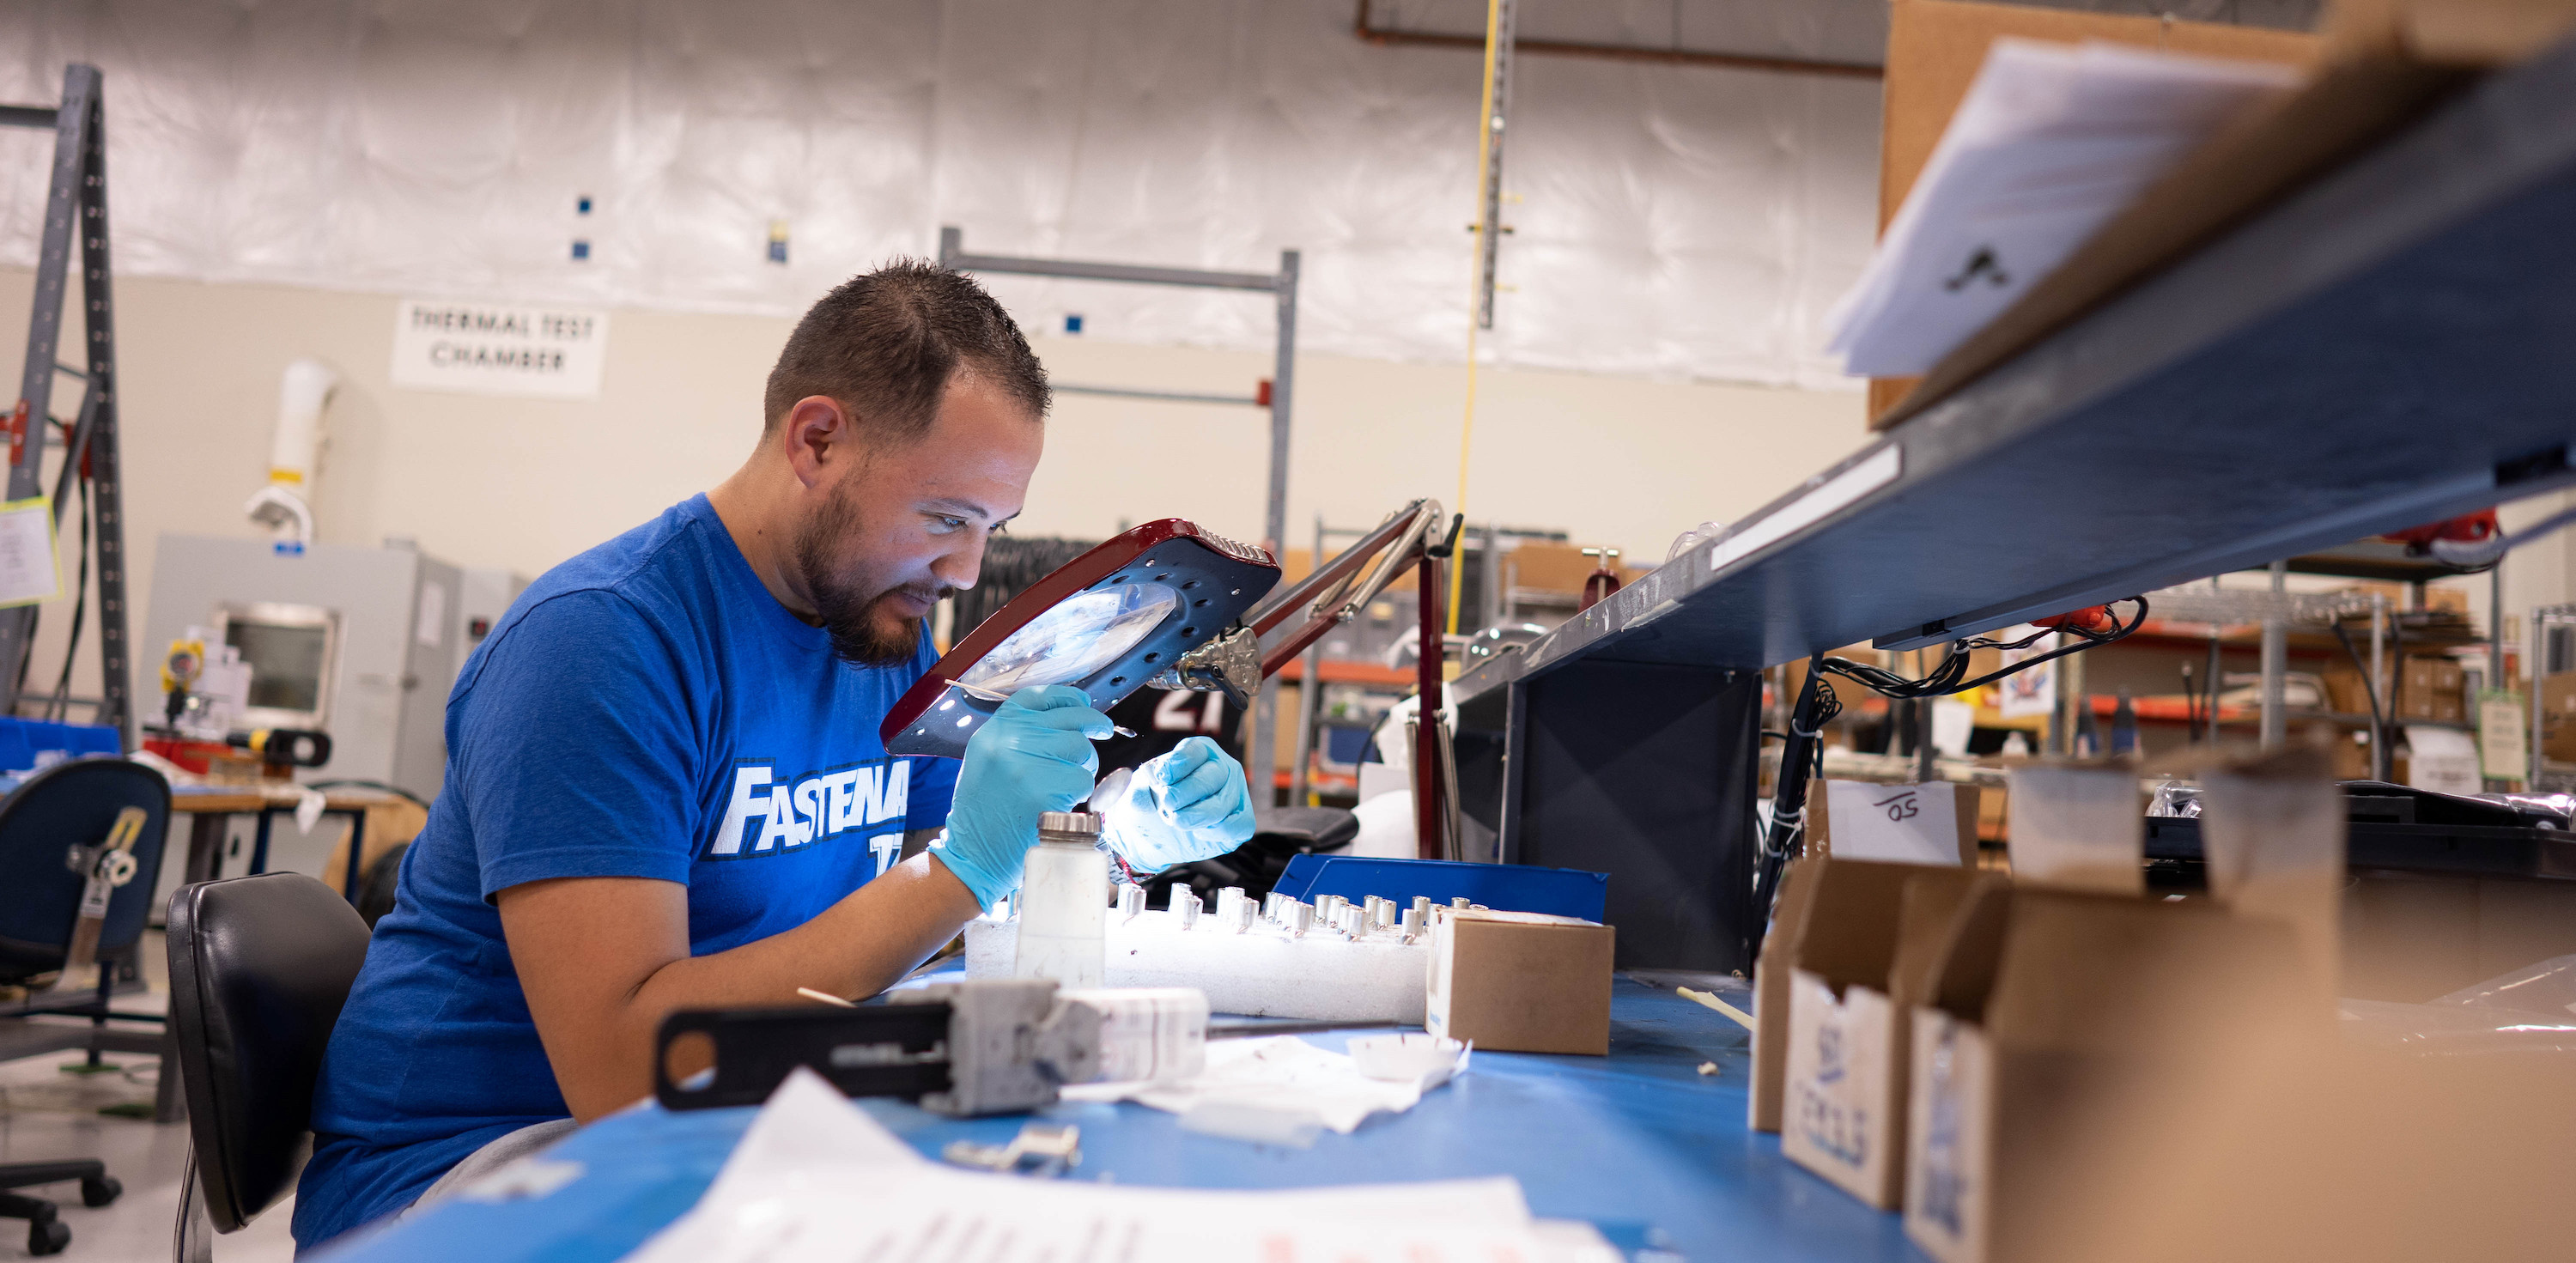 Fastenal employee precisely working on his product